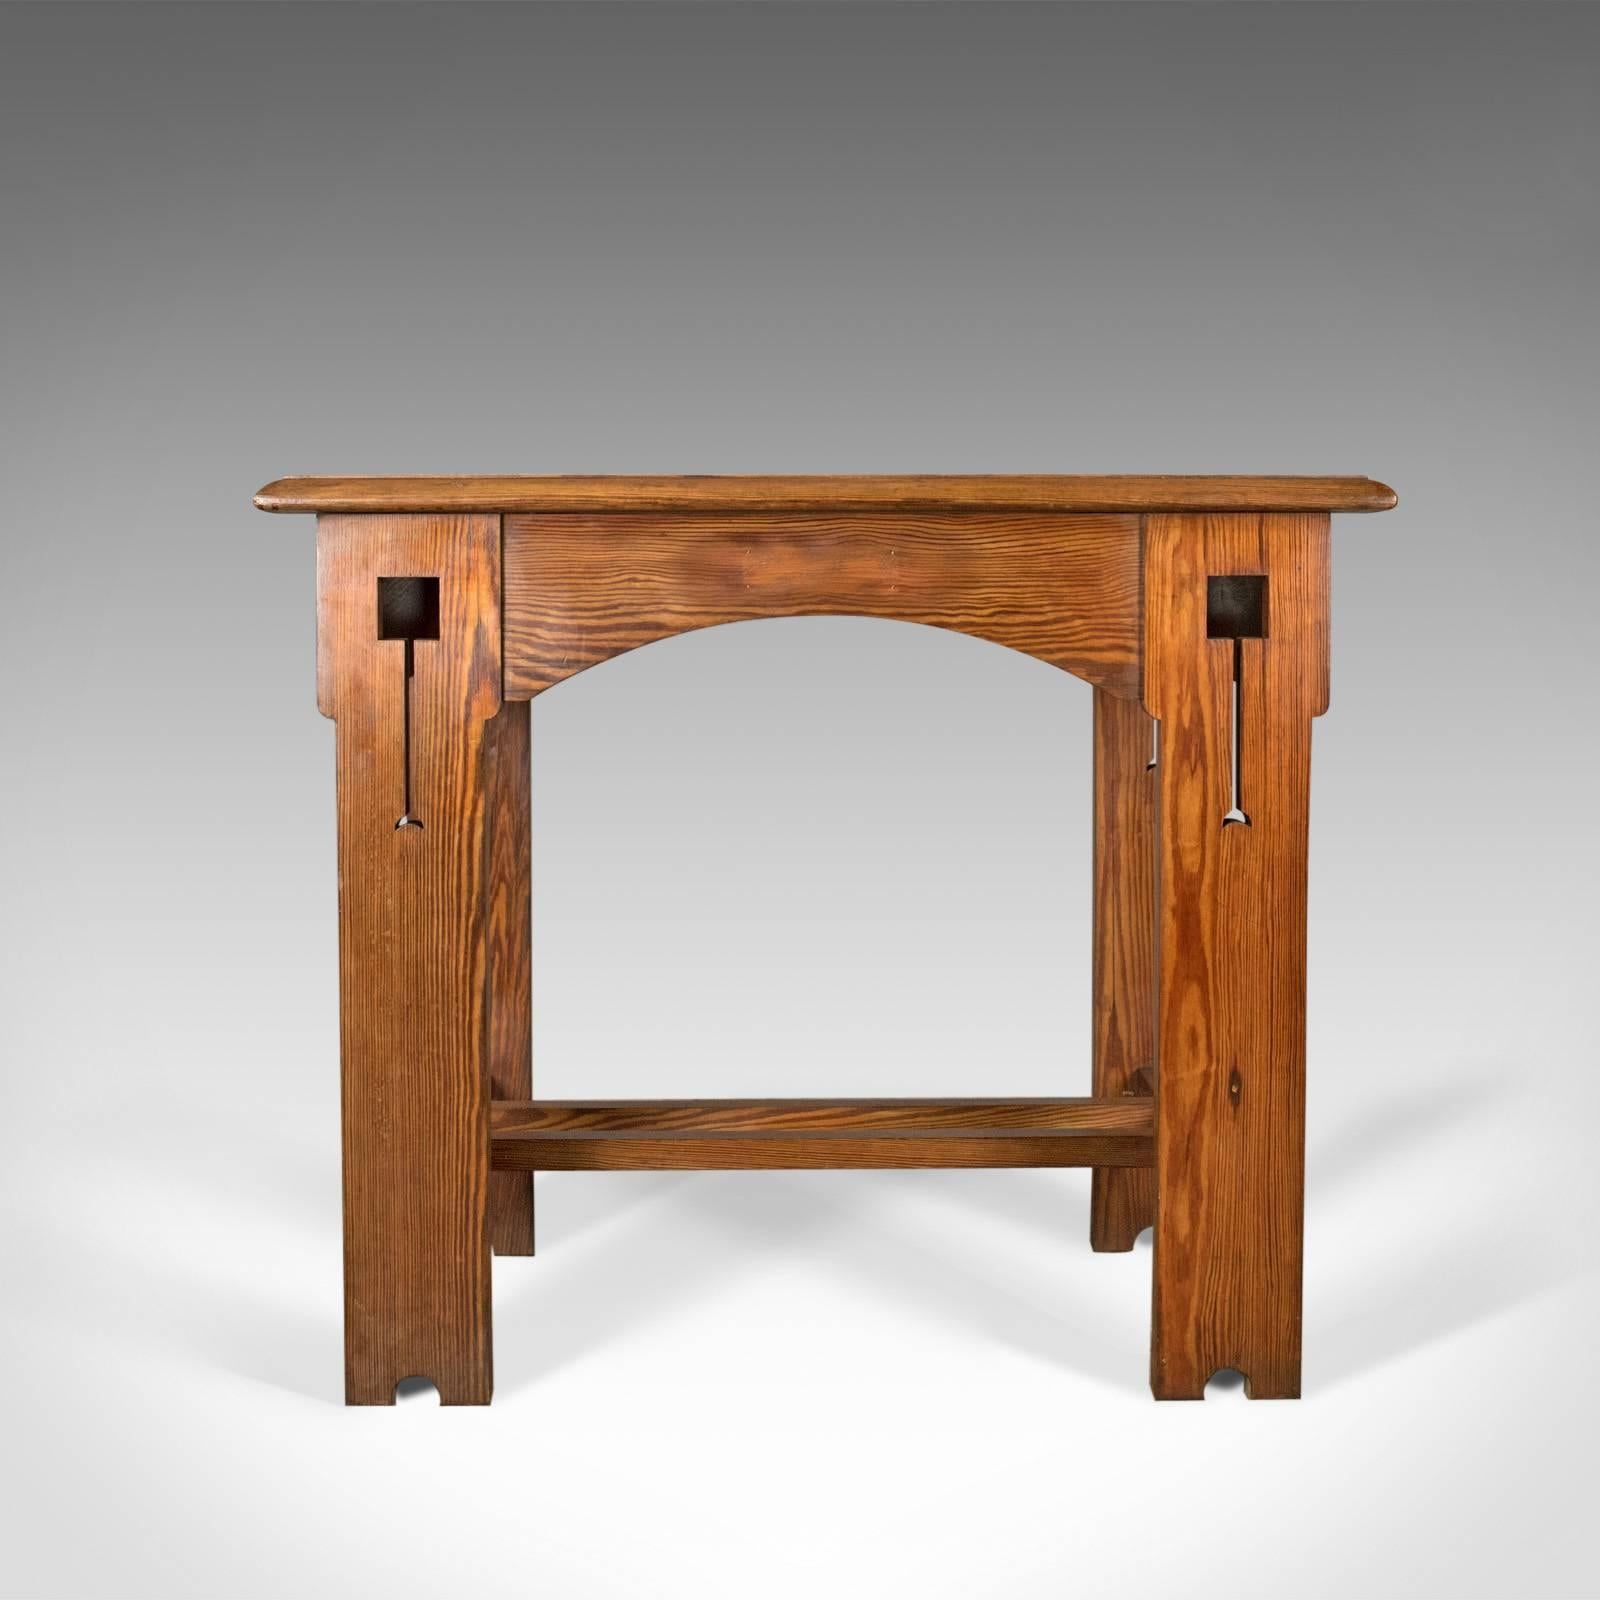 This is an antique console table, an English, Arts & Crafts, Victorian pine side table dating to circa 1880.

A delightful Arts & Crafts console table with ecclesiastic overtones
In pitch pine displaying good color and grain interest
Of quality